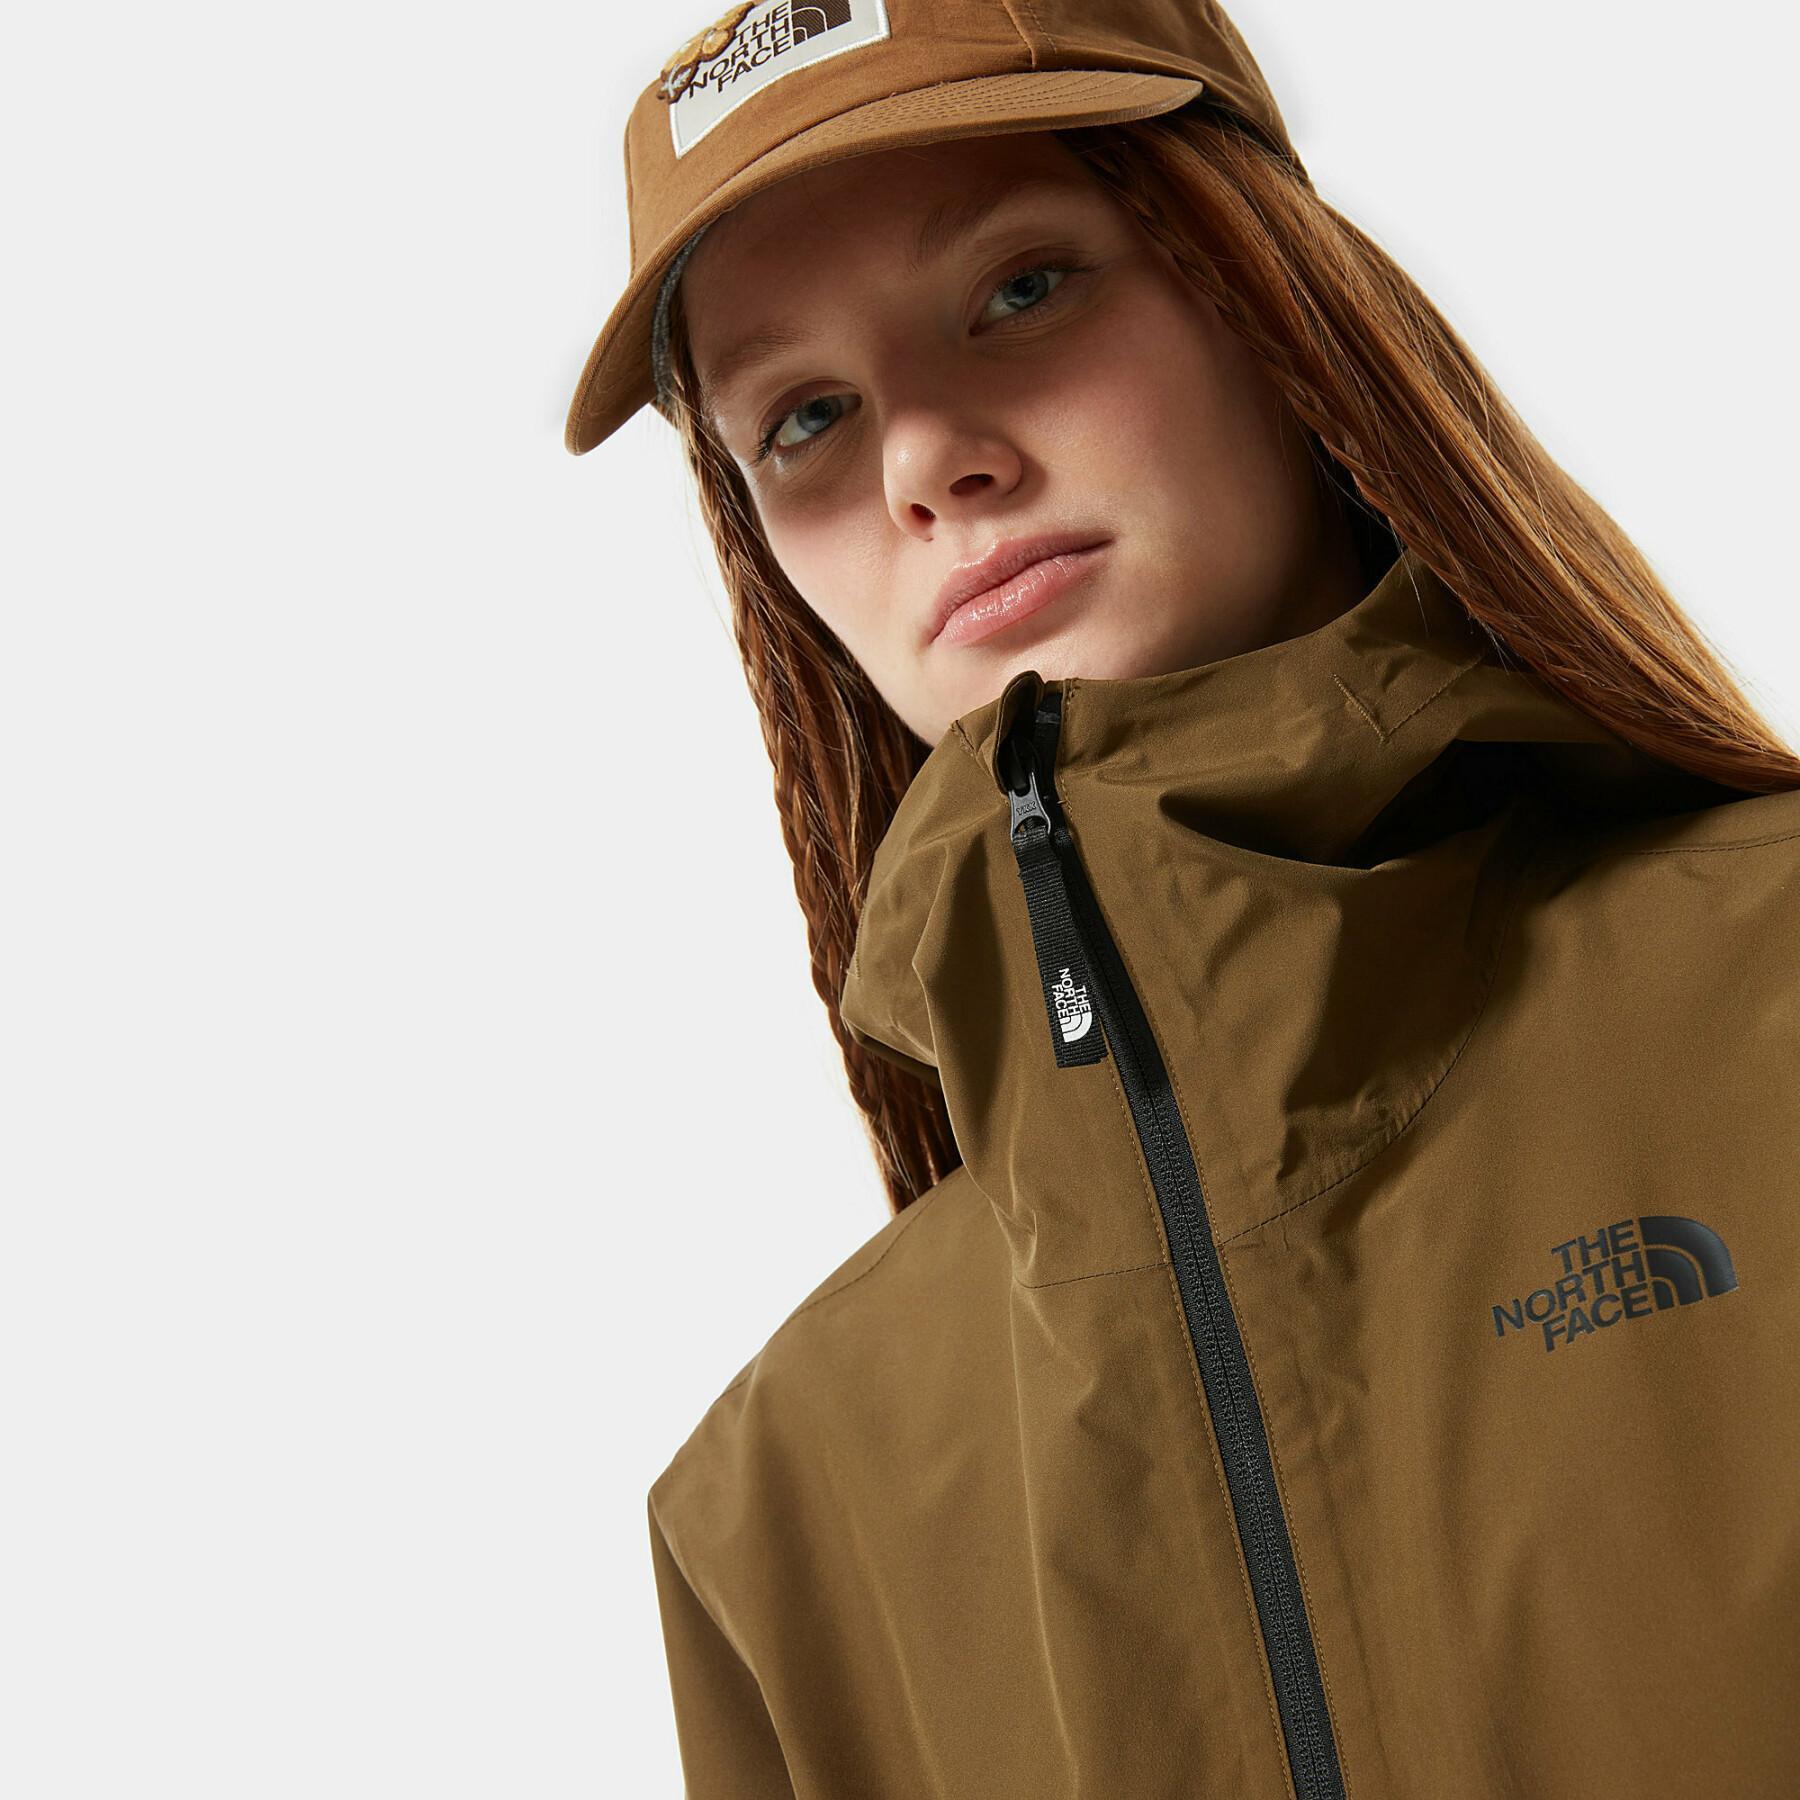 Women's anorak The North Face